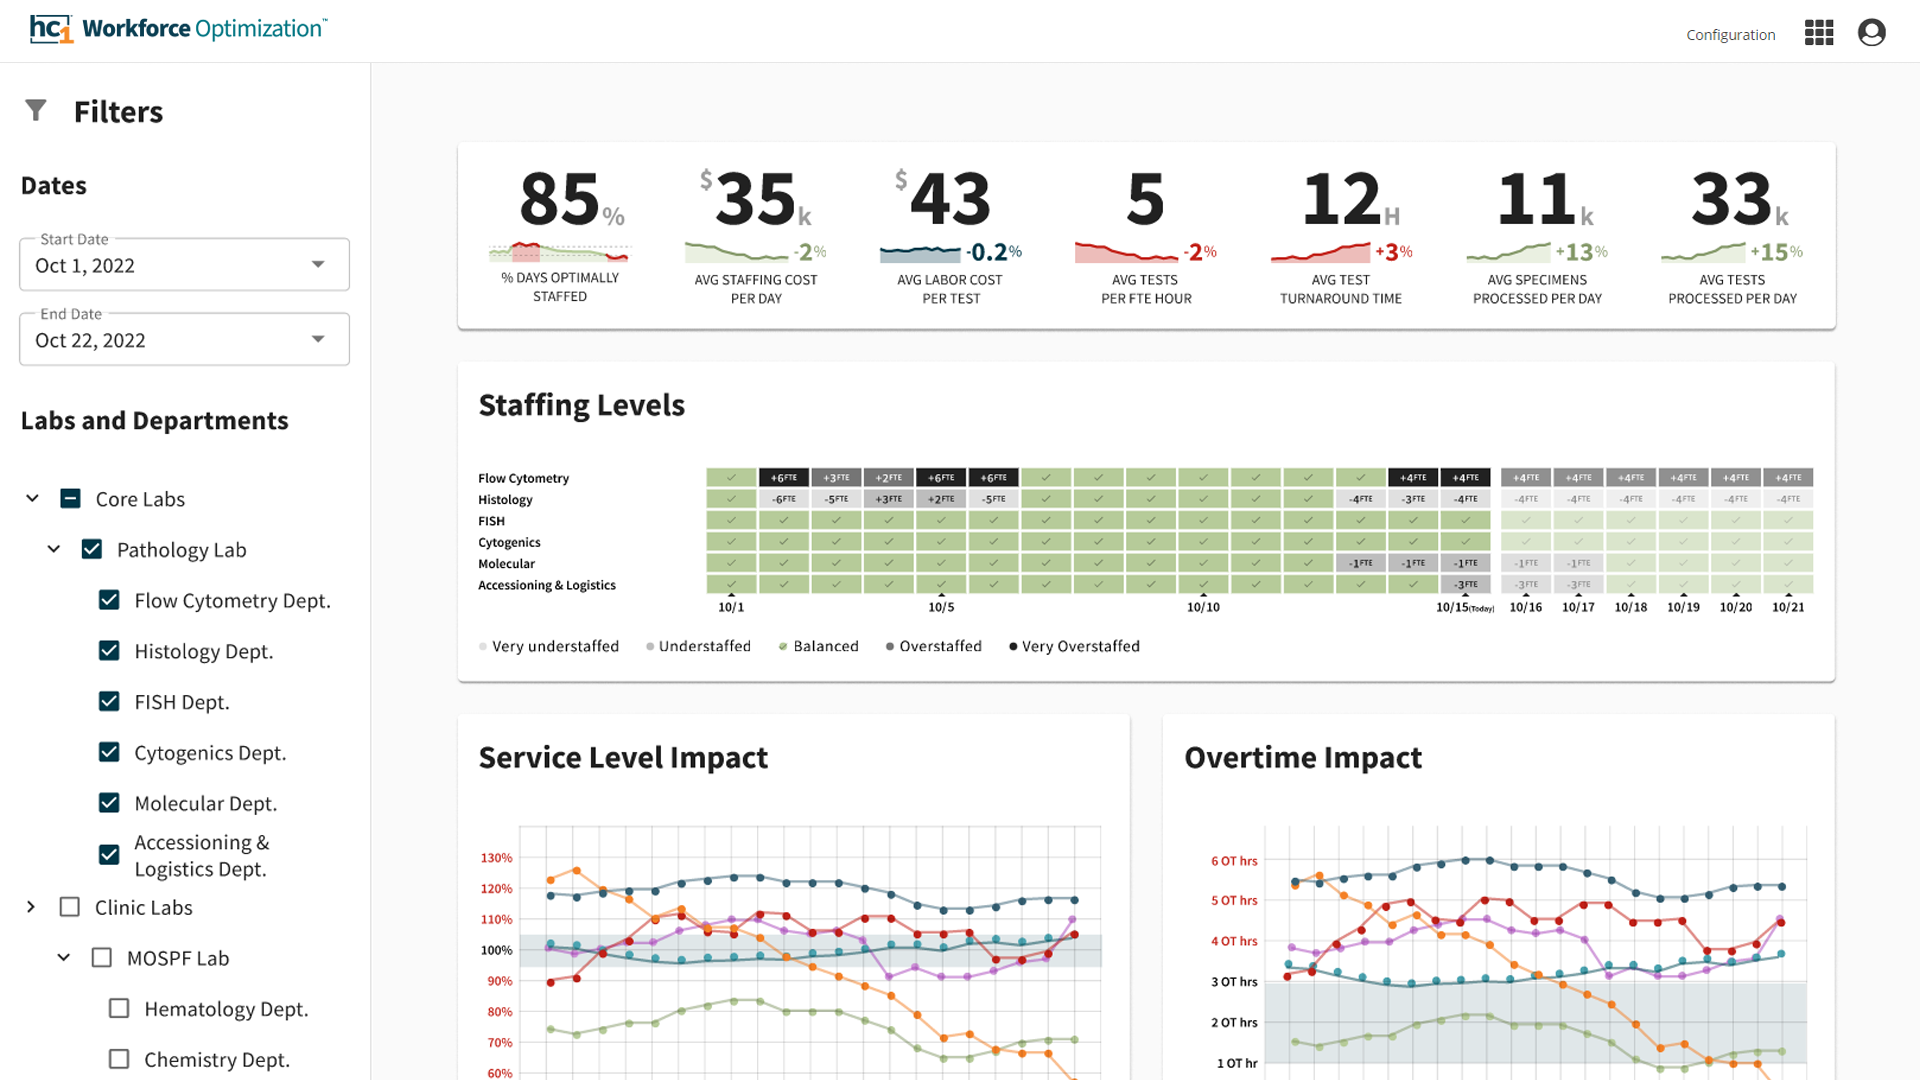 Monitor trending and predicted staffing levels